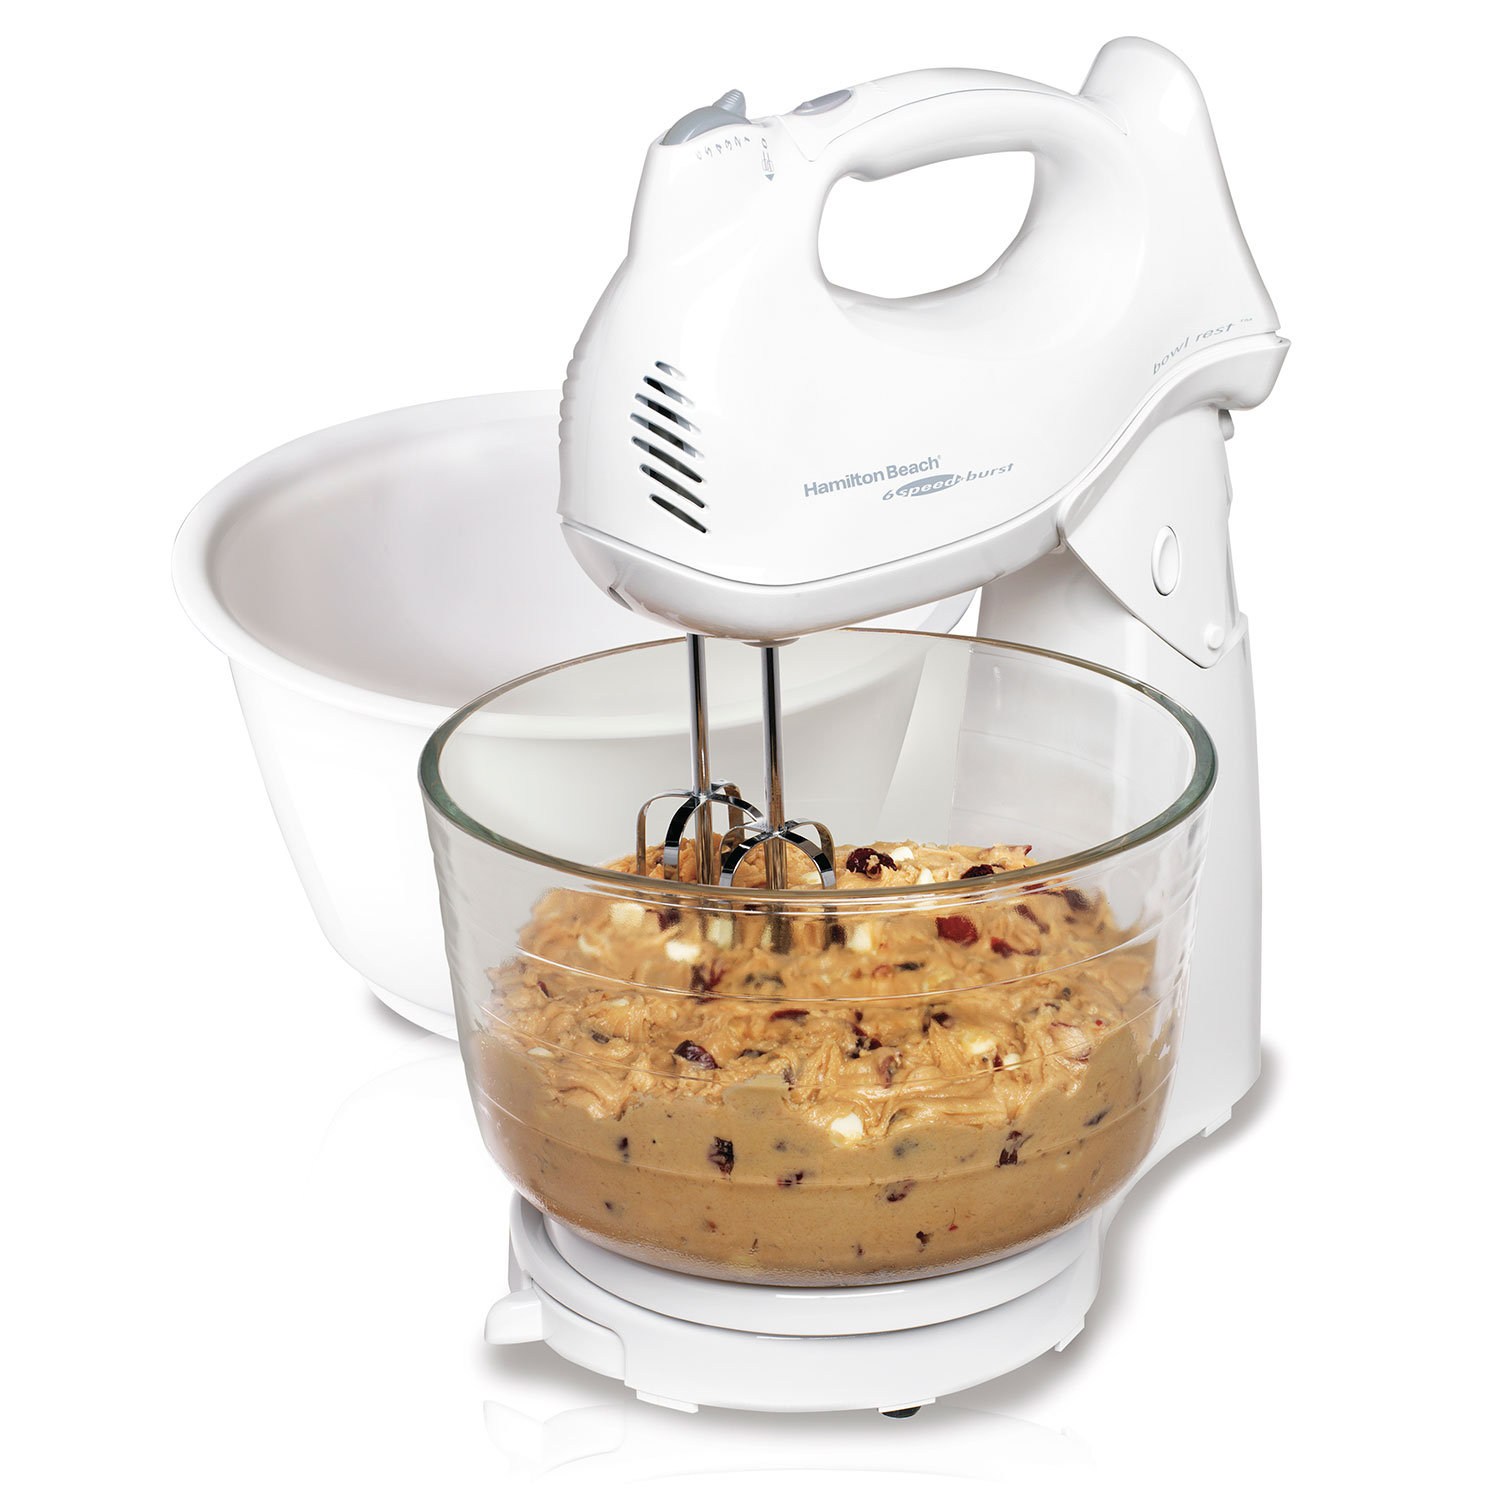 Power Deluxe 6 Speed Stand Mixer, White (64693)